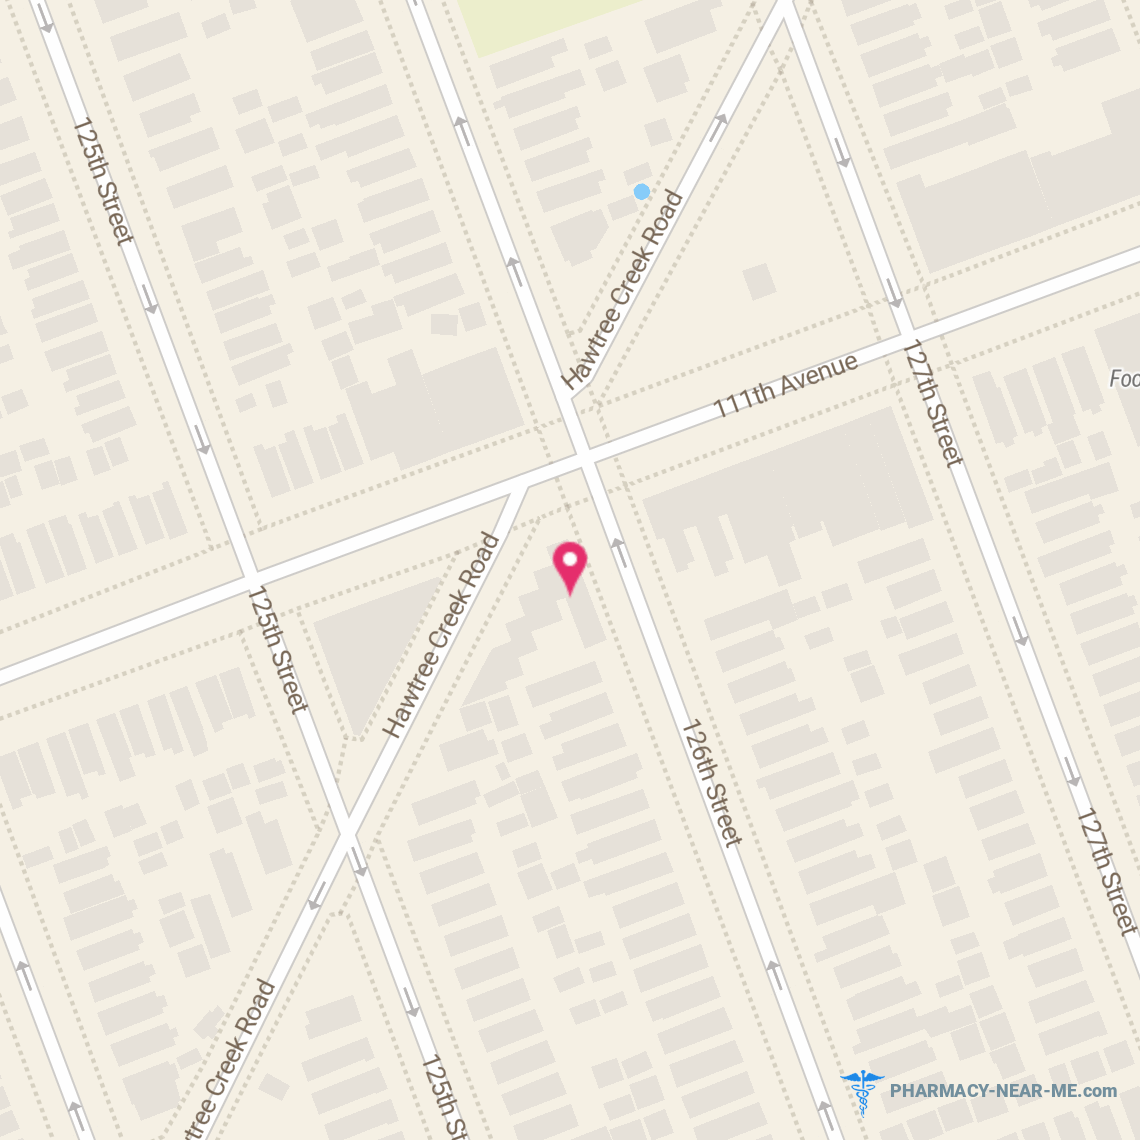 ZONE PHARMACY INC - Pharmacy Hours, Phone, Reviews & Information: 125-20 111th Avenue, Queens, New York 11420, United States